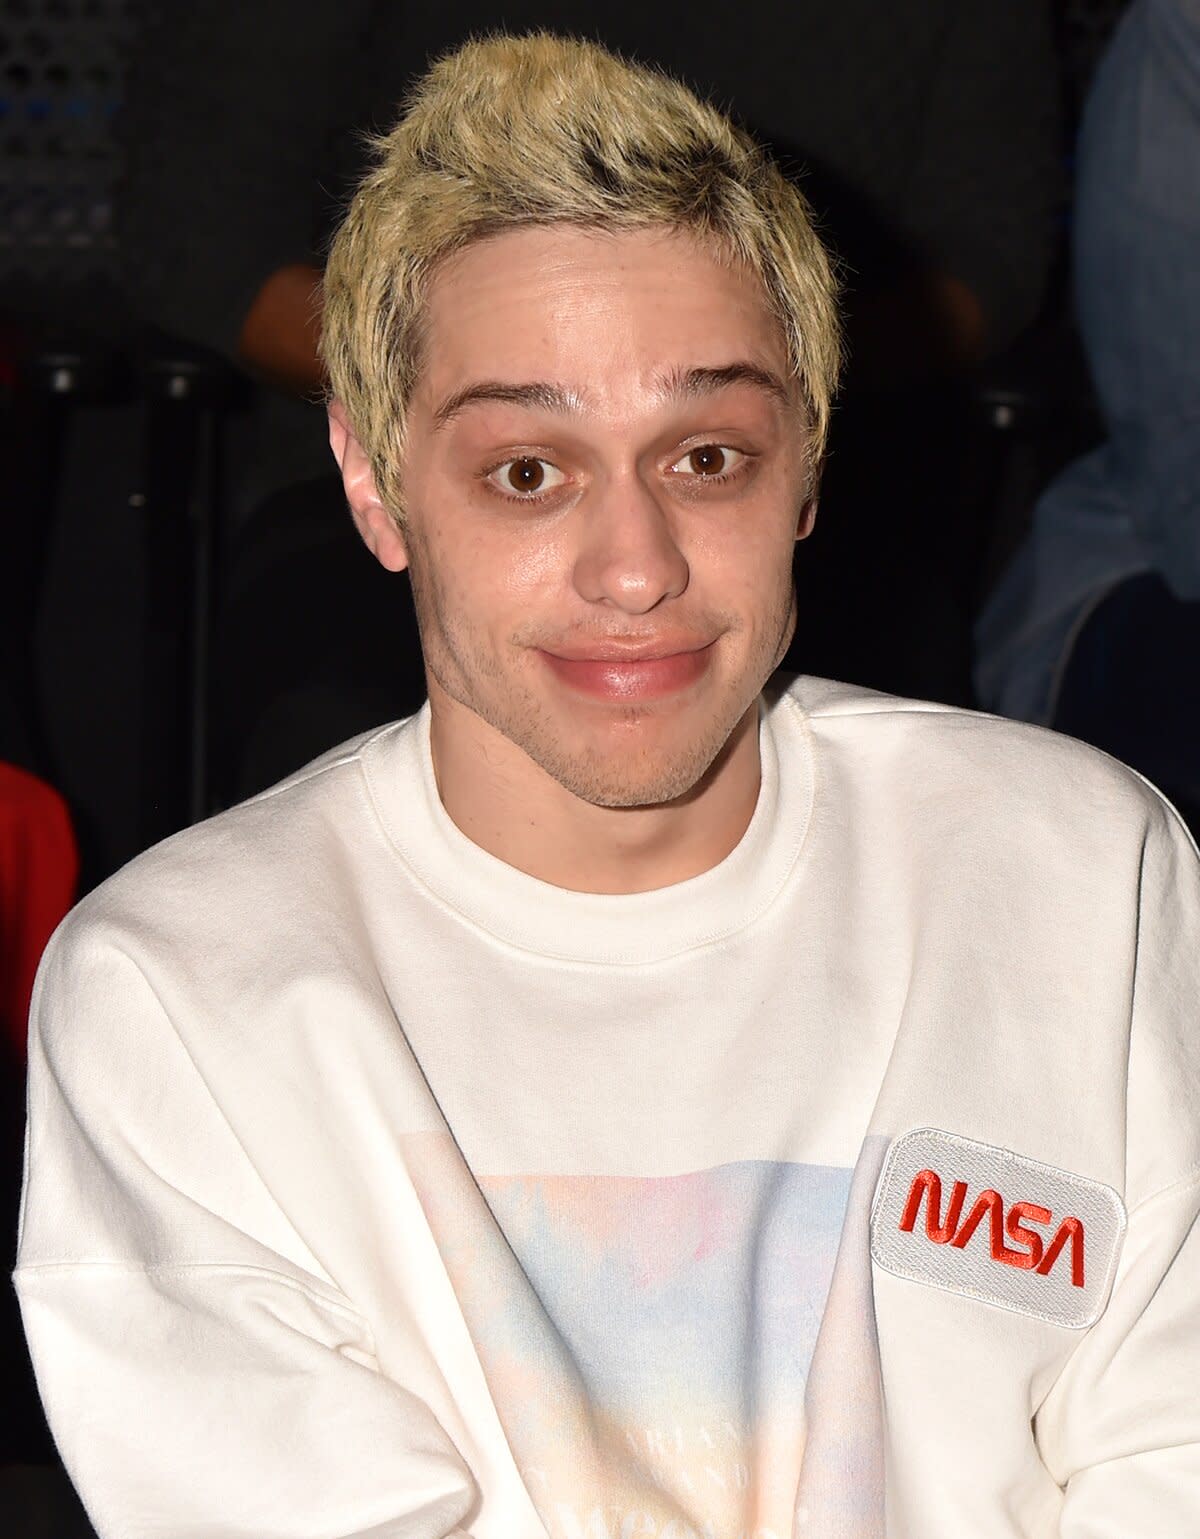 NEW YORK, NY - AUGUST 20: Pete Davidson attend the 2018 MTV Video Music Awards at Radio City Music Hall on August 20, 2018